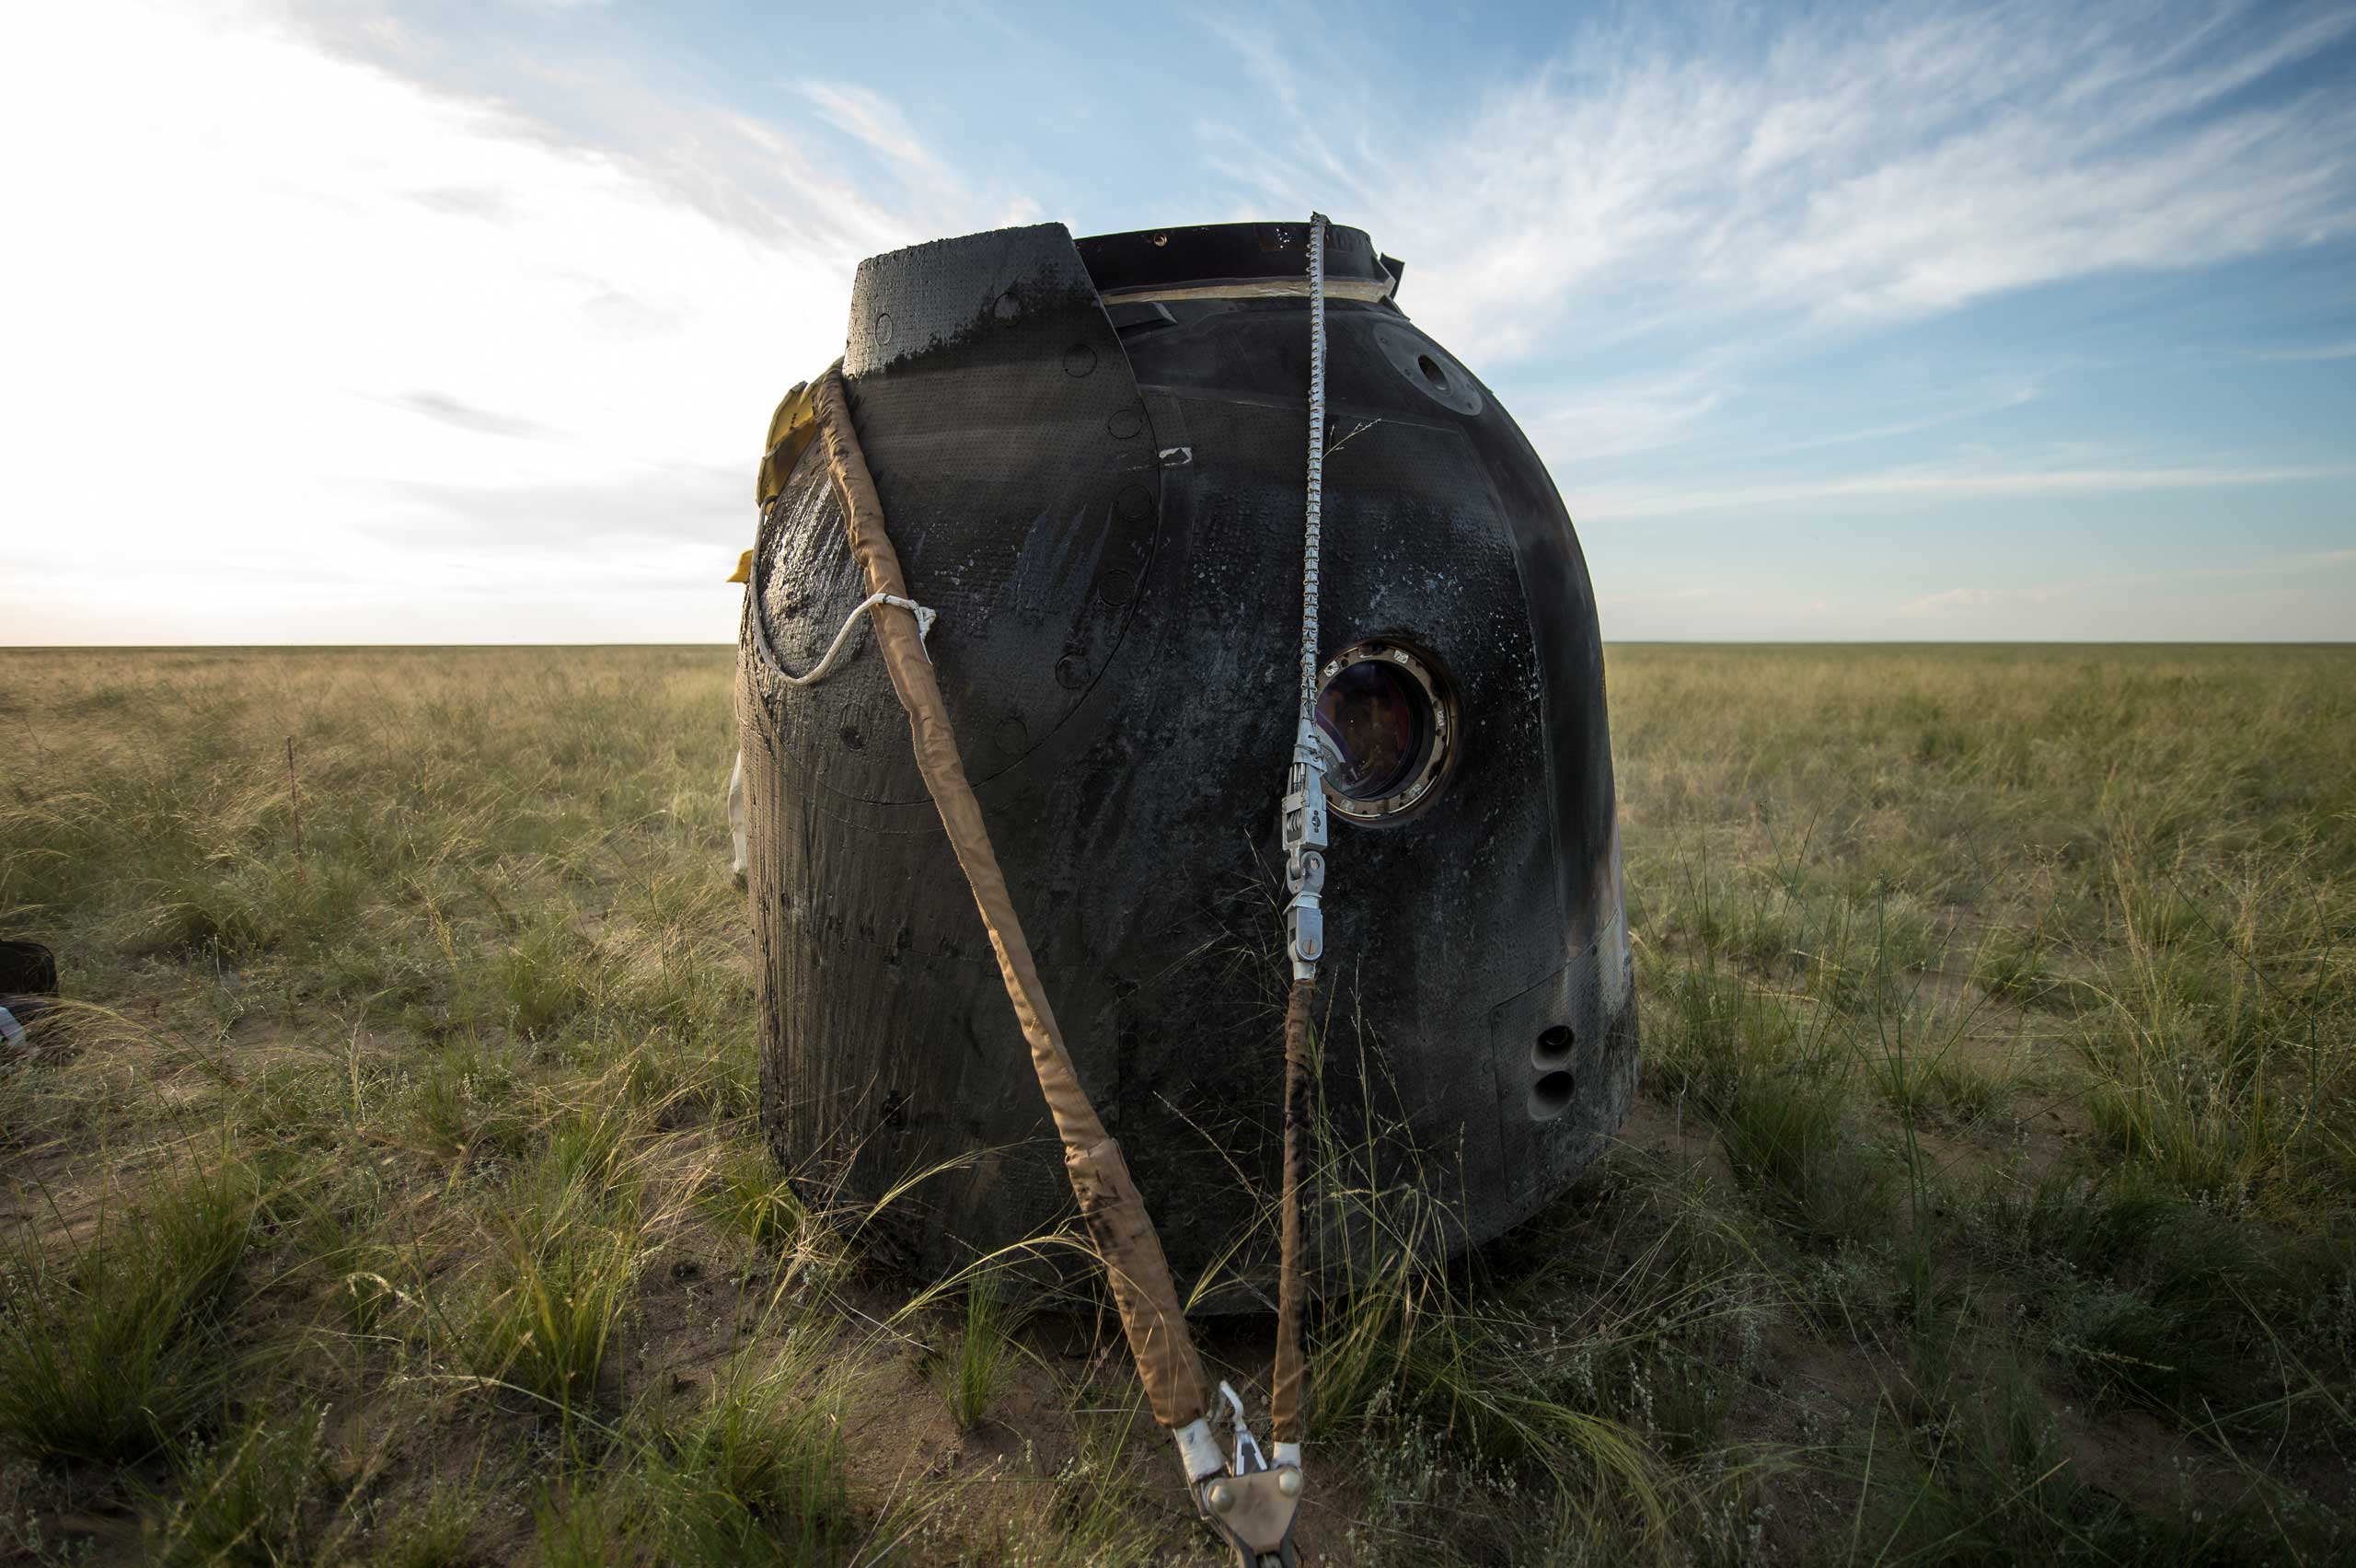 The Soyuz spacecraft returned from and came to rest in the desert near the town of Zhezkazgan, Kazakhstan, on June 11, 2015. Virts, Shkaplerov and Cristoforetti were still aboard the spacecraft in this photo. (Bill Ingalls—NASA)